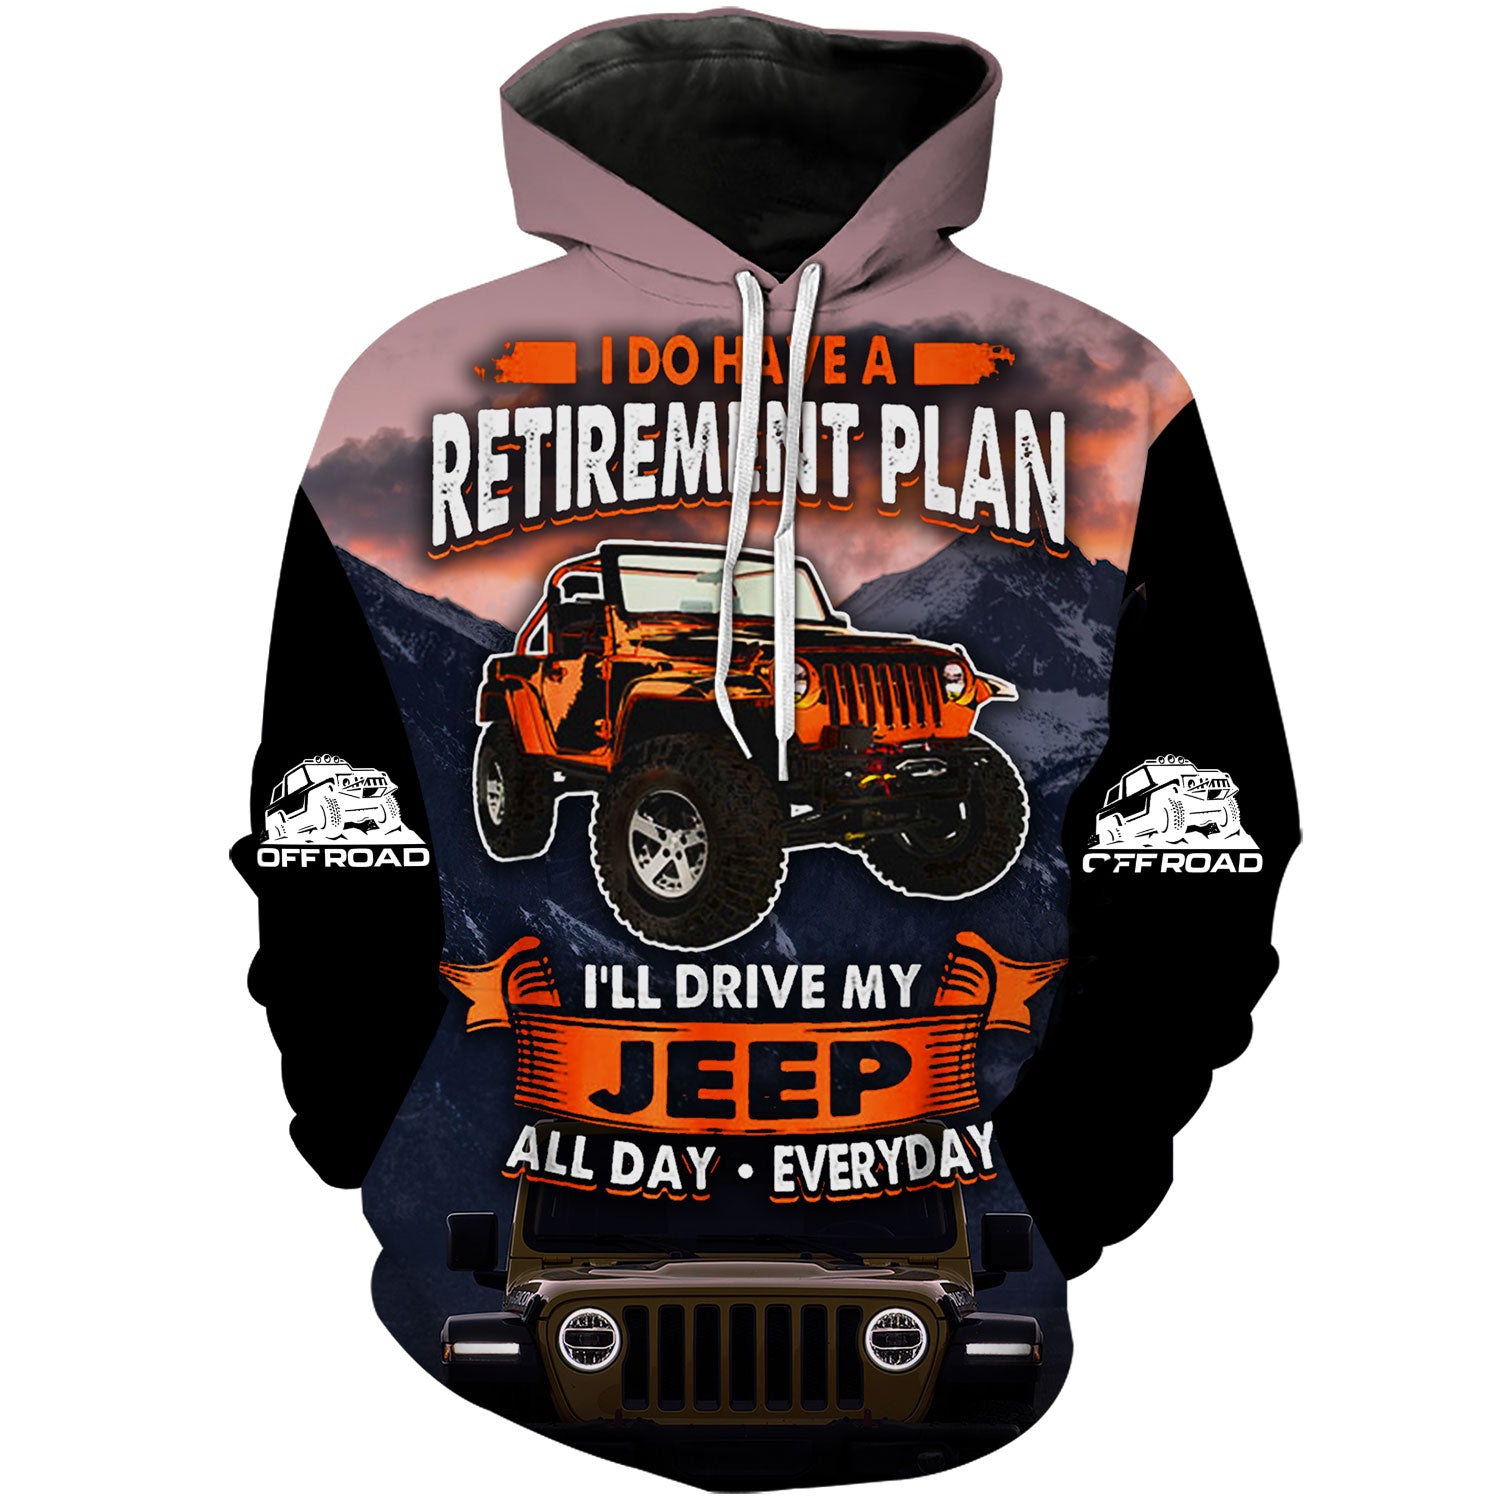 Retirement Plan, Drive Jeep All Day - Hoodie